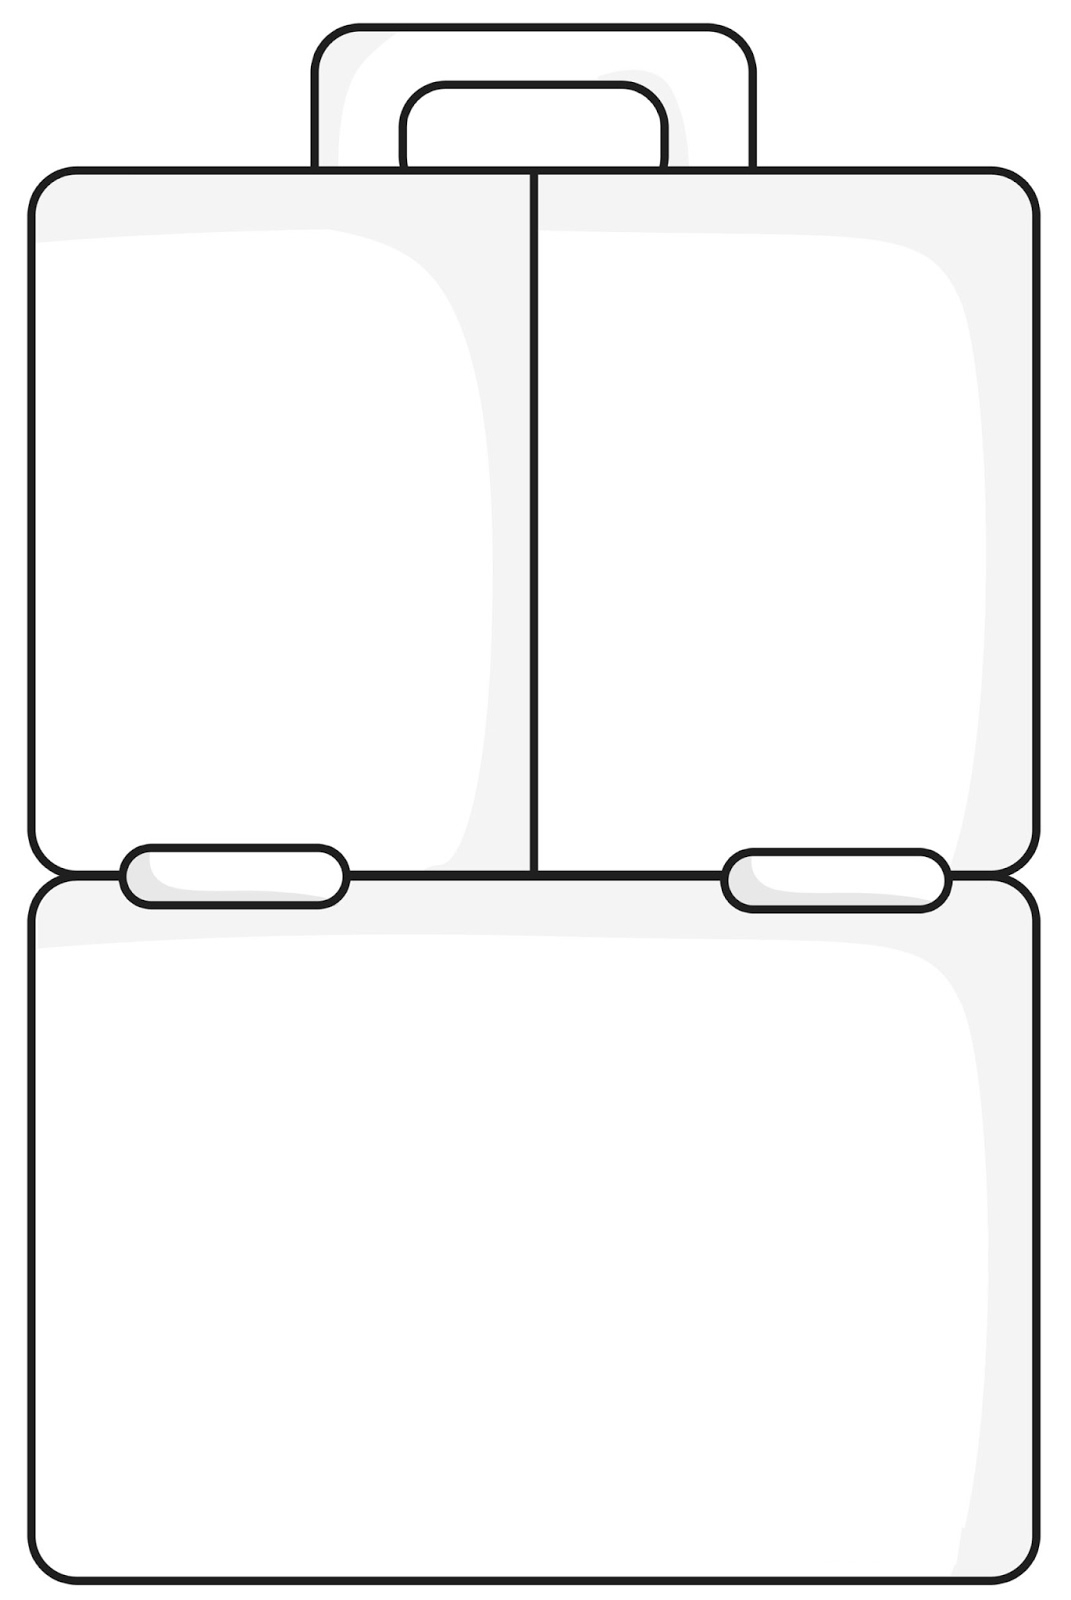 7-best-images-of-lunch-box-printable-template-free-printable-lunch